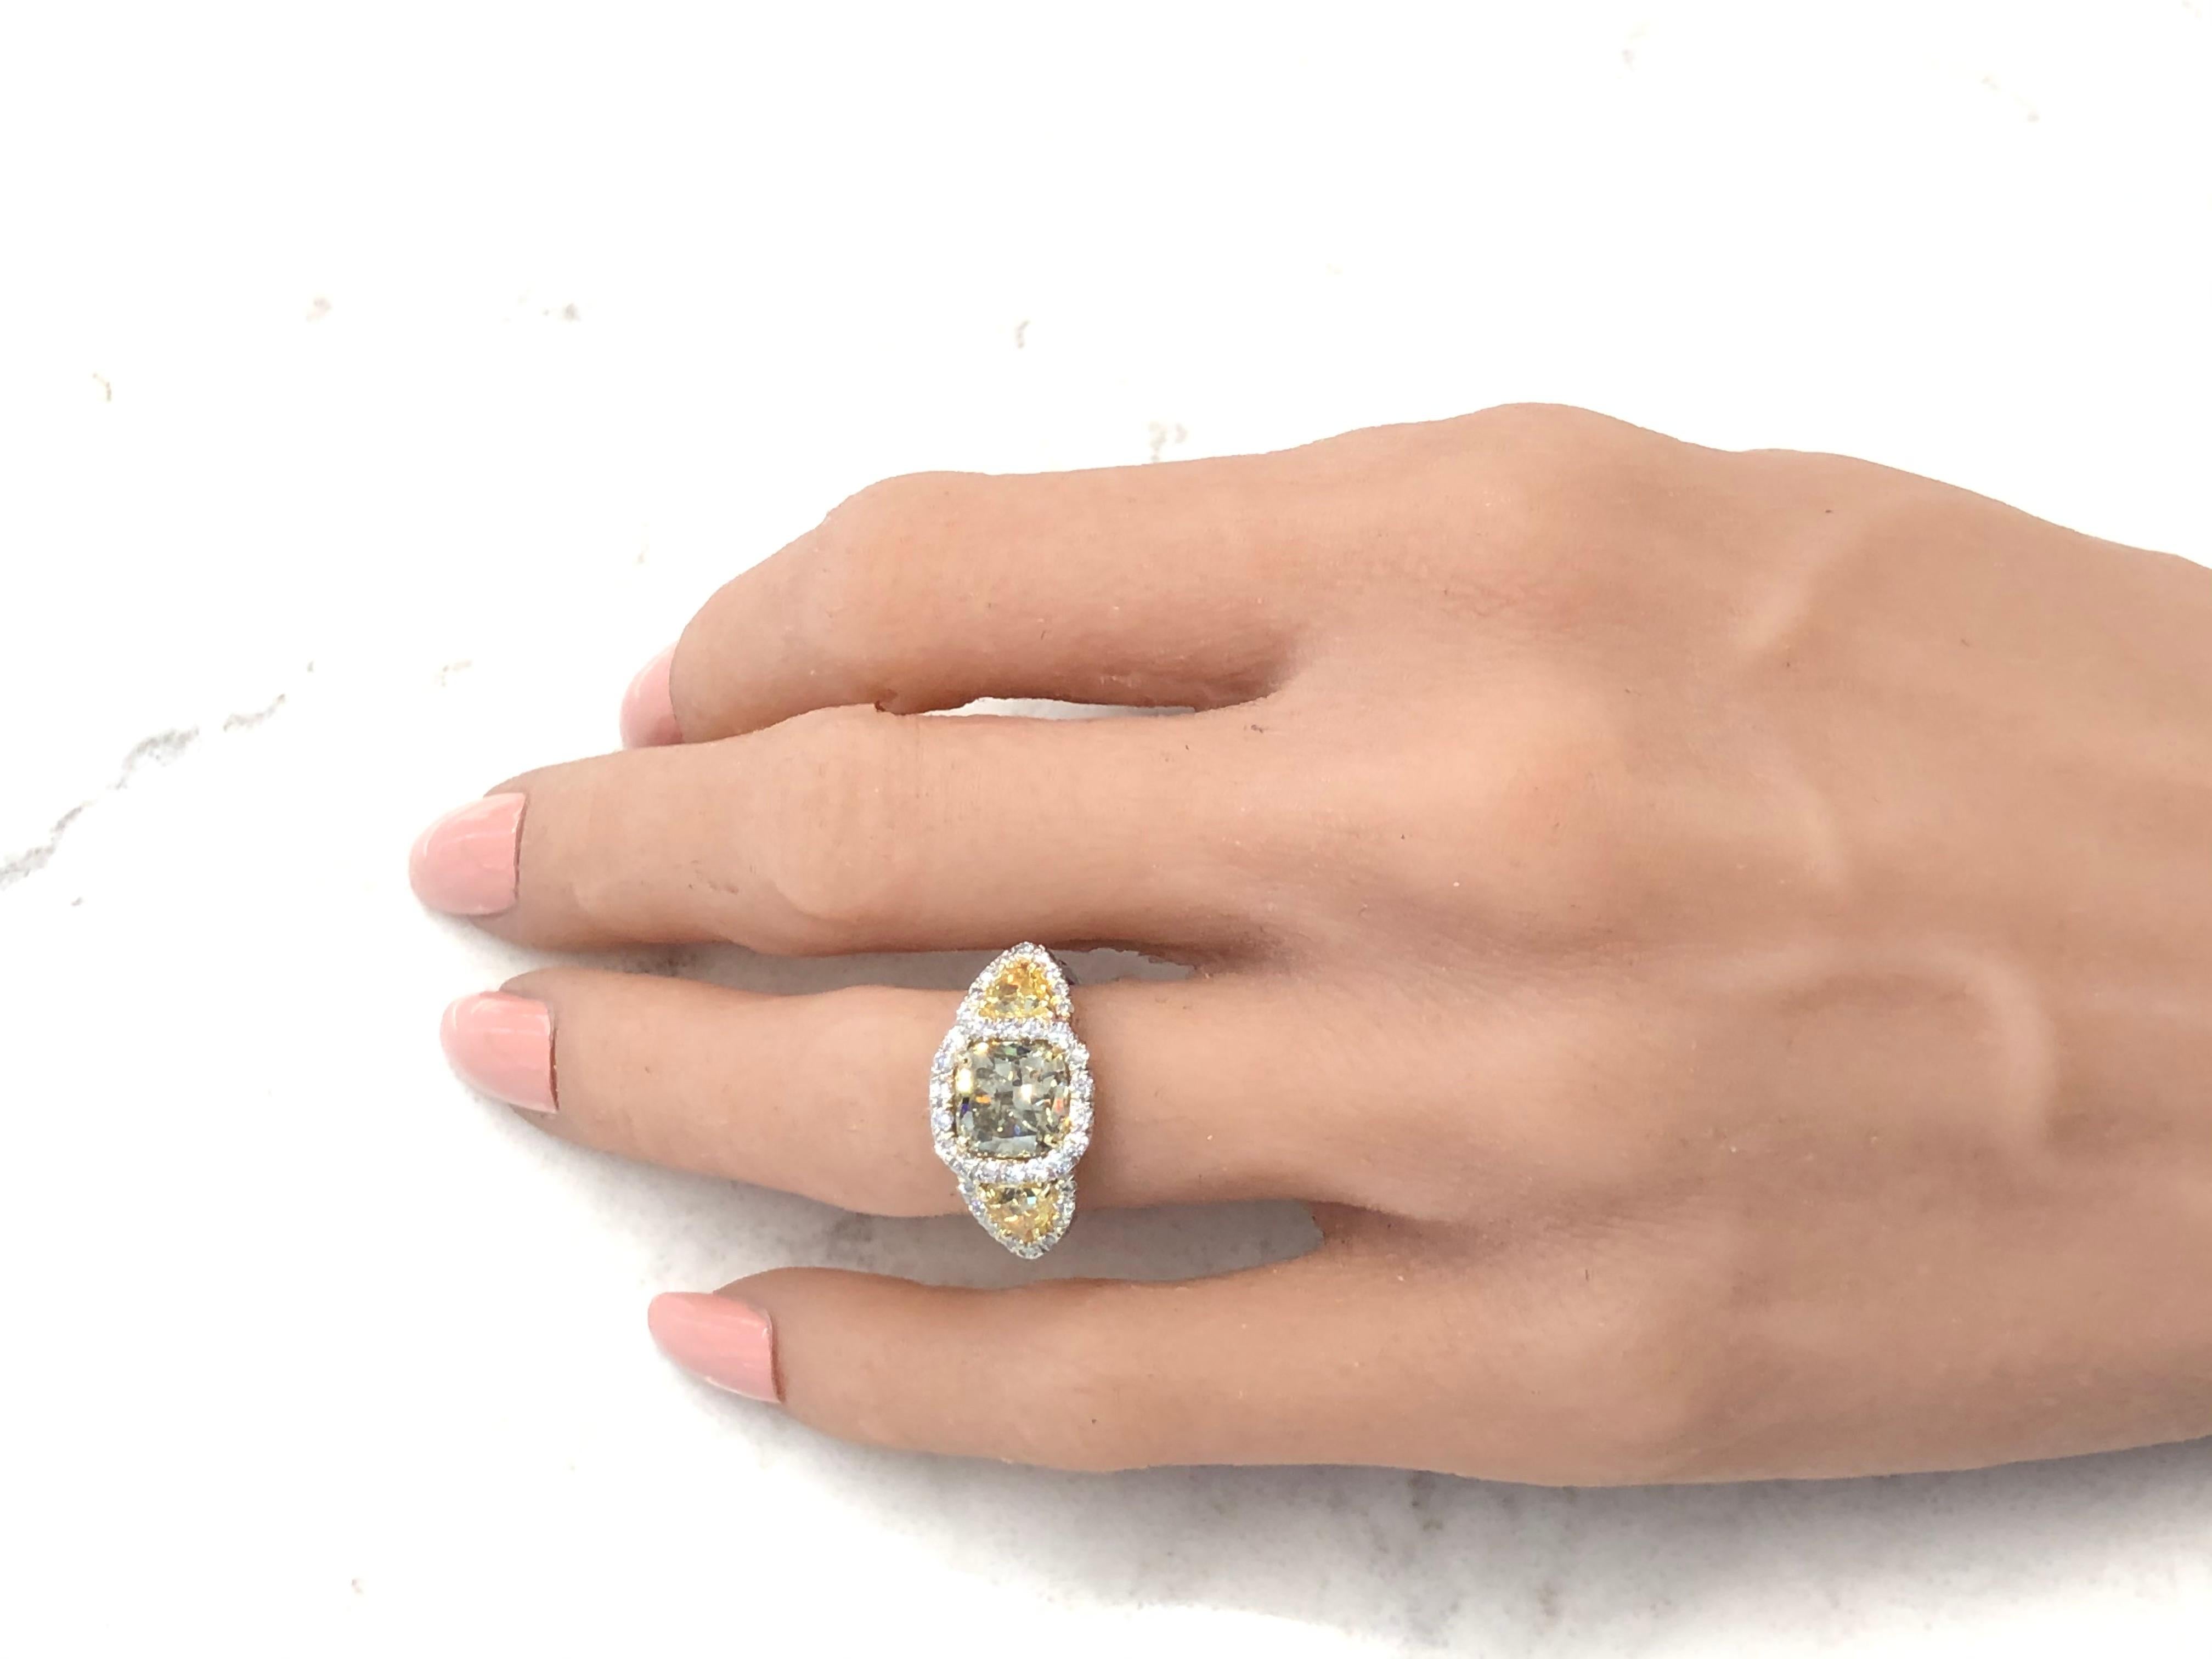 Celebrate your birthday or anniversary occasion in ultimate style with this show-stopping multi-diamond ring made in brightly polished platinum. A 3.10-carat cushion cut fancy brownish-greenish yellow diamond takes center stage with SI2 clarity,